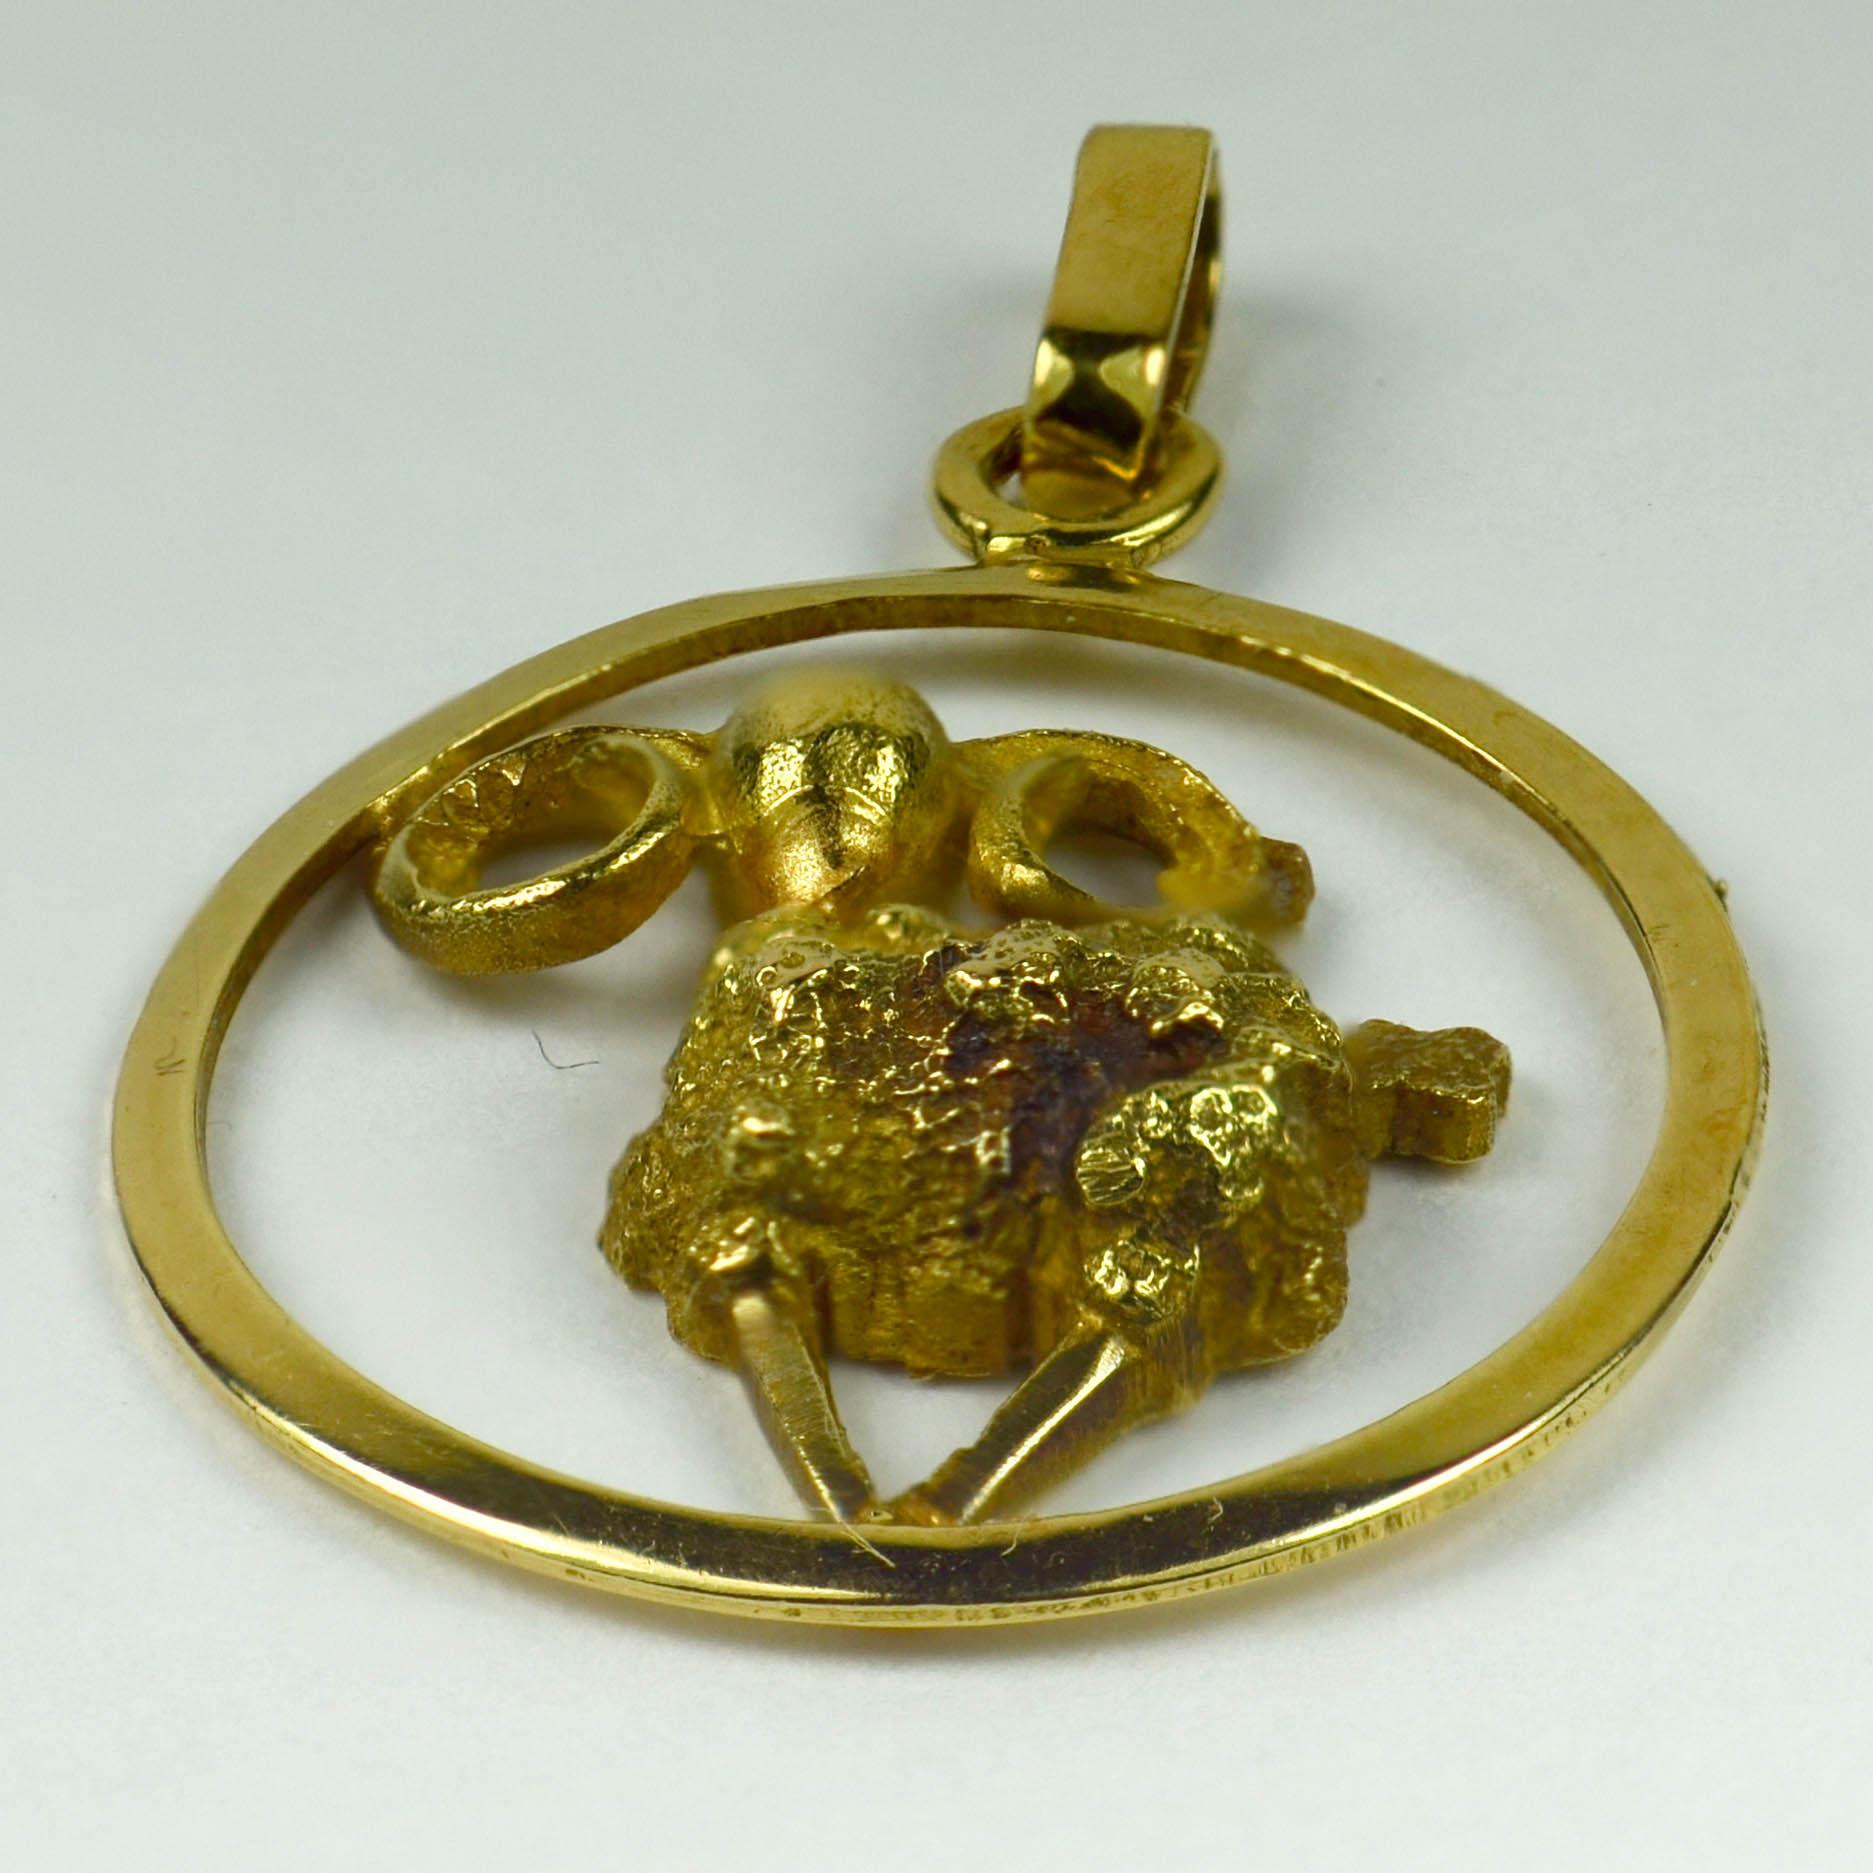 A French 18 karat (18K) yellow gold Ares charm pendant designed as a three-dimensional ram within a round frame. Stamped with the eagle's head for 18 karat gold and French manufacture.

Dimensions: 2.5 x 1.8 x 0.4 cm
Weight: 2.07 grams